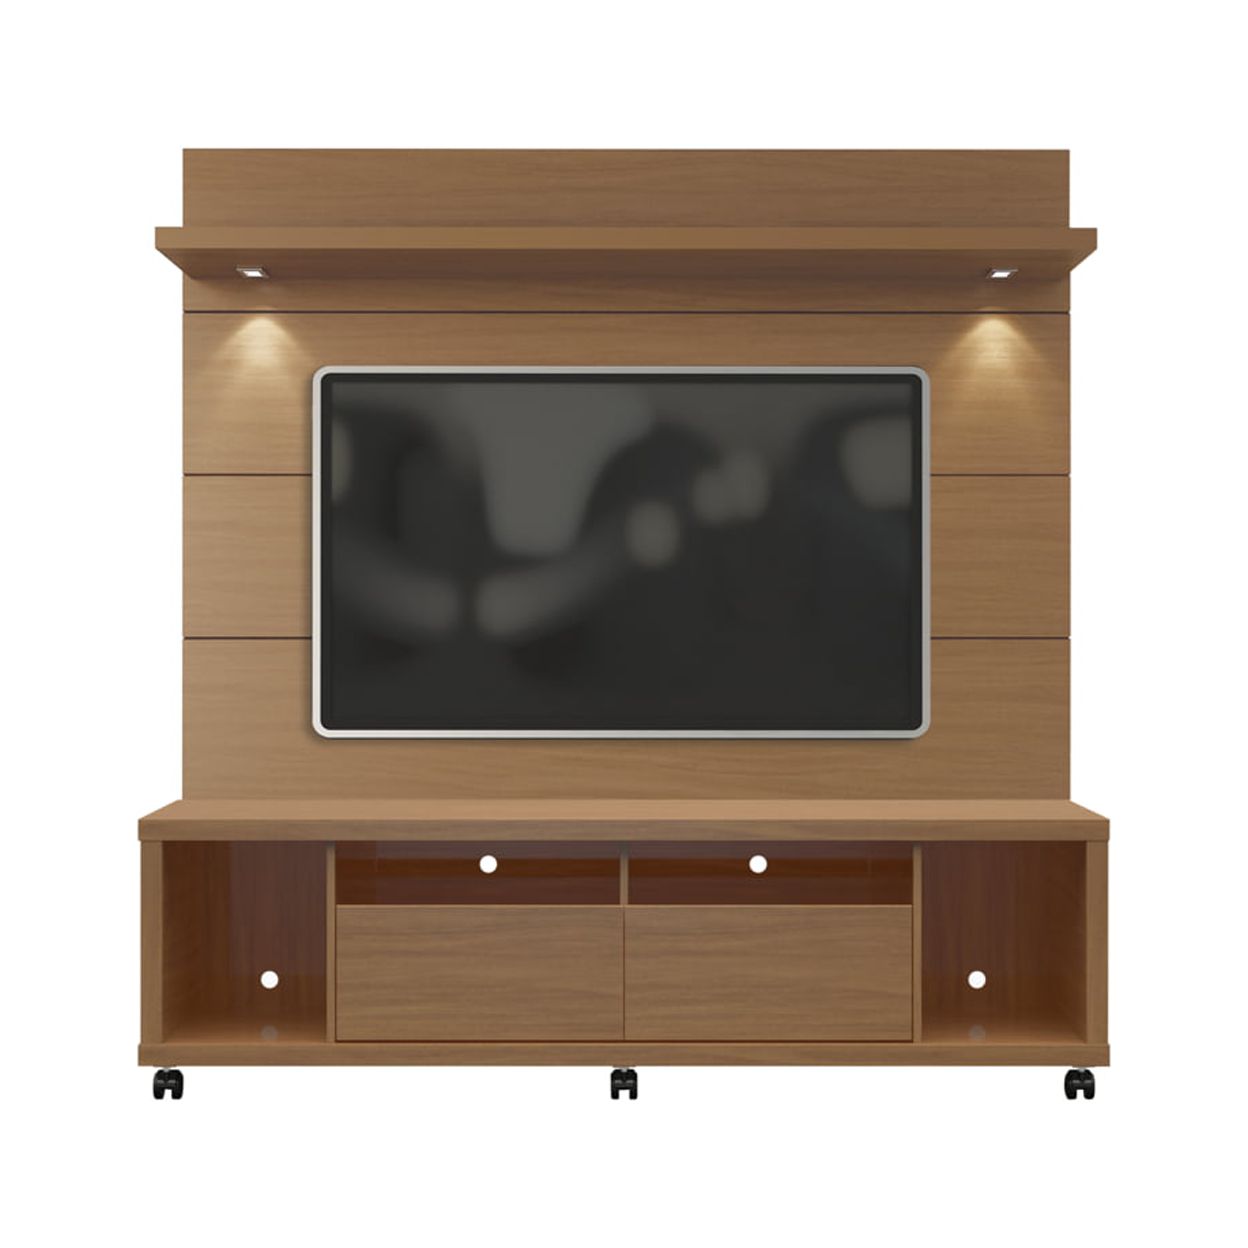 Cabrini TV Stand and Floating Wall TV Panel with LED Lights 1.8 - image 1 of 3